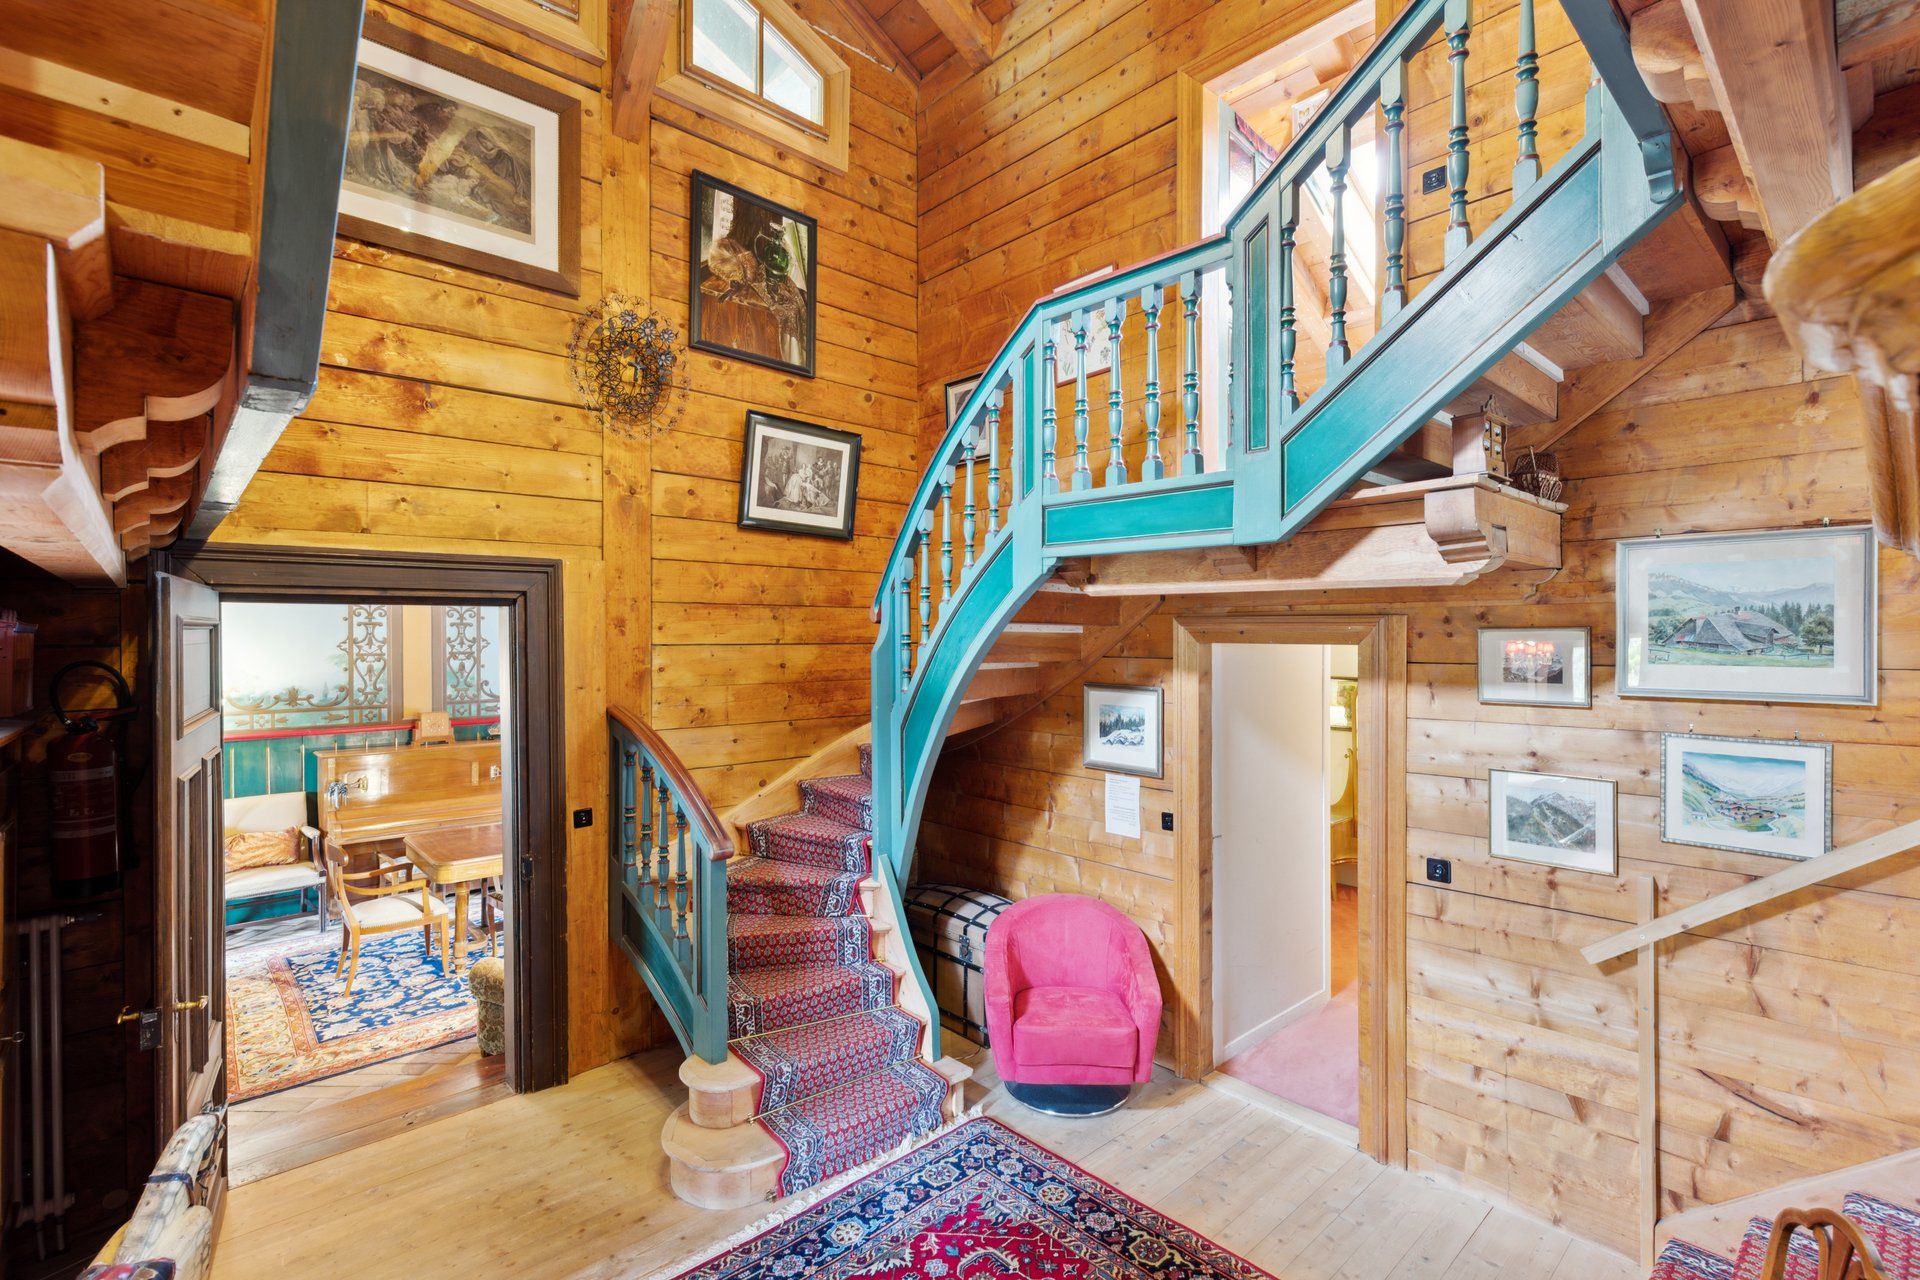 Staircase - hall - main chalet